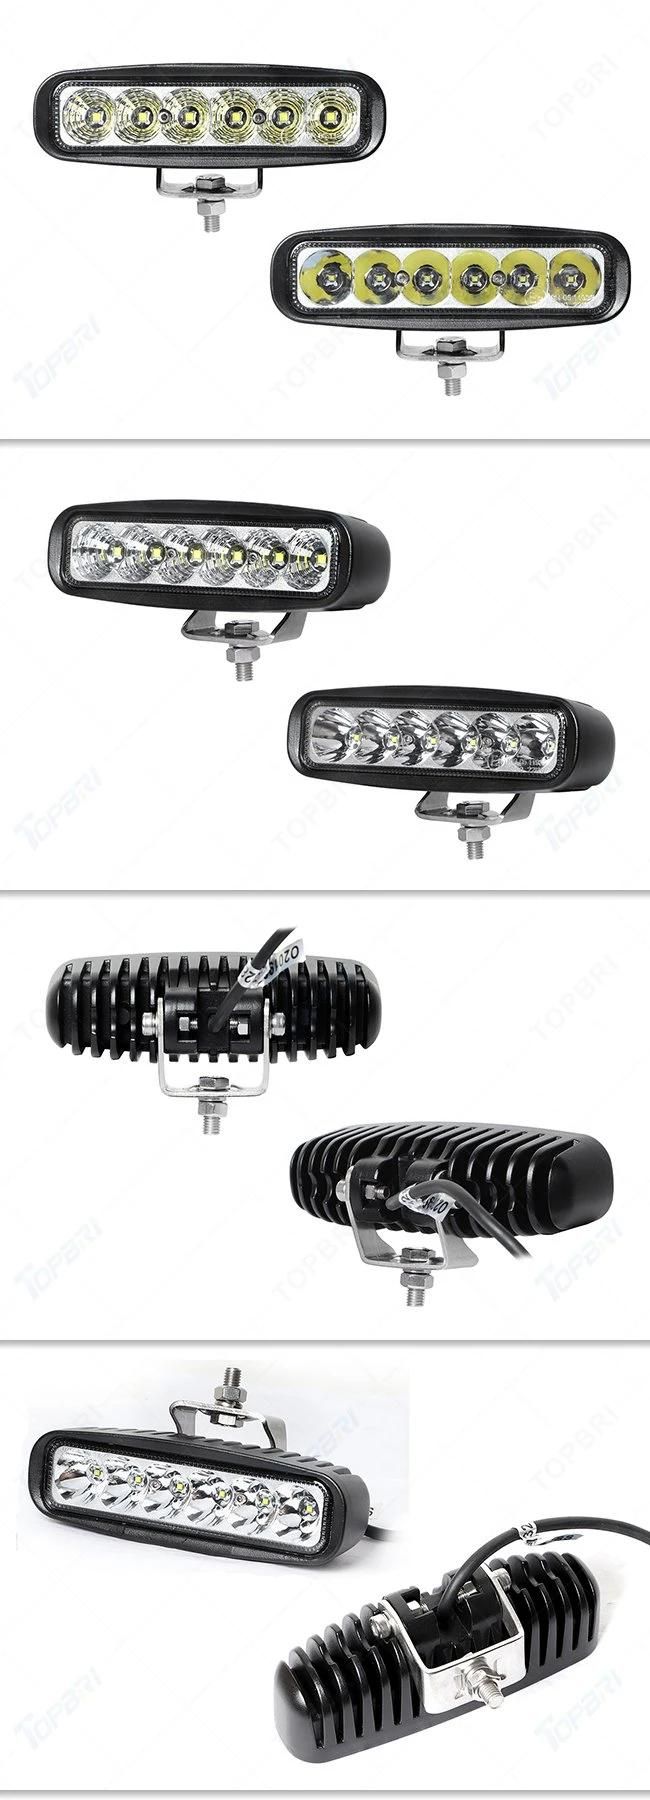 30W LED Work Light for Car Offroad Motorcycle Truck Trailer Auto